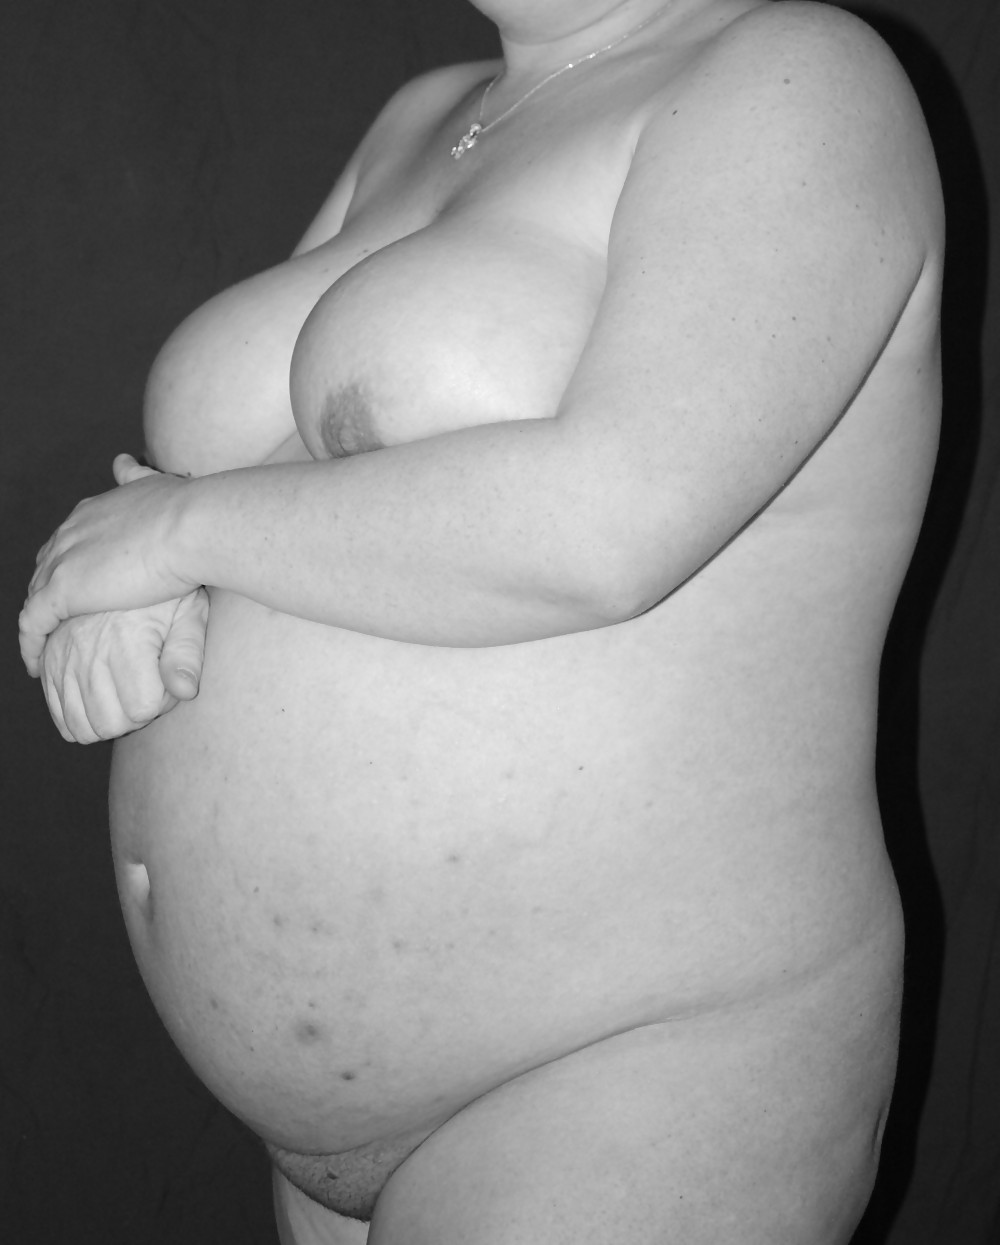 More Pregnant Wifey - What would you do to her? #9656971